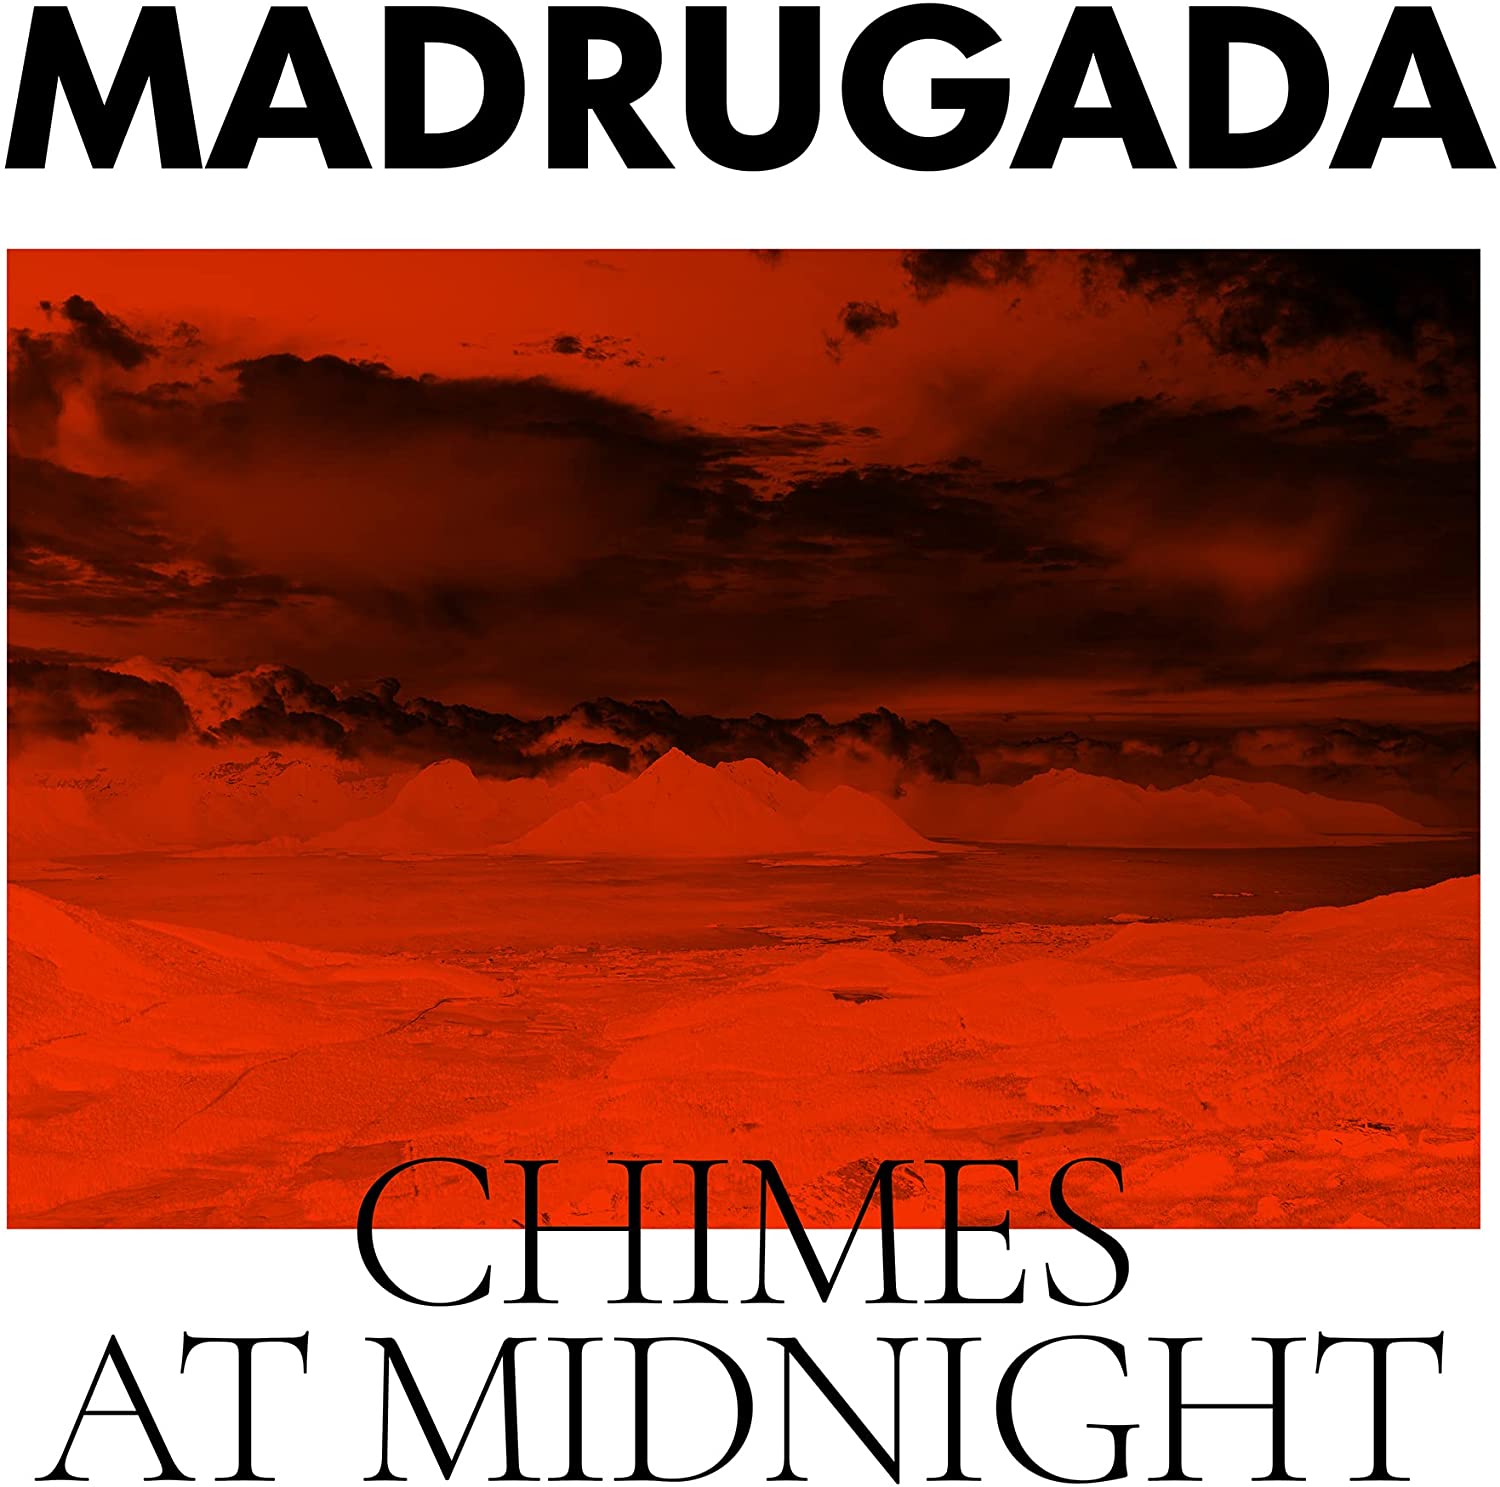 Madrugada Chimes At Midnight -indie-